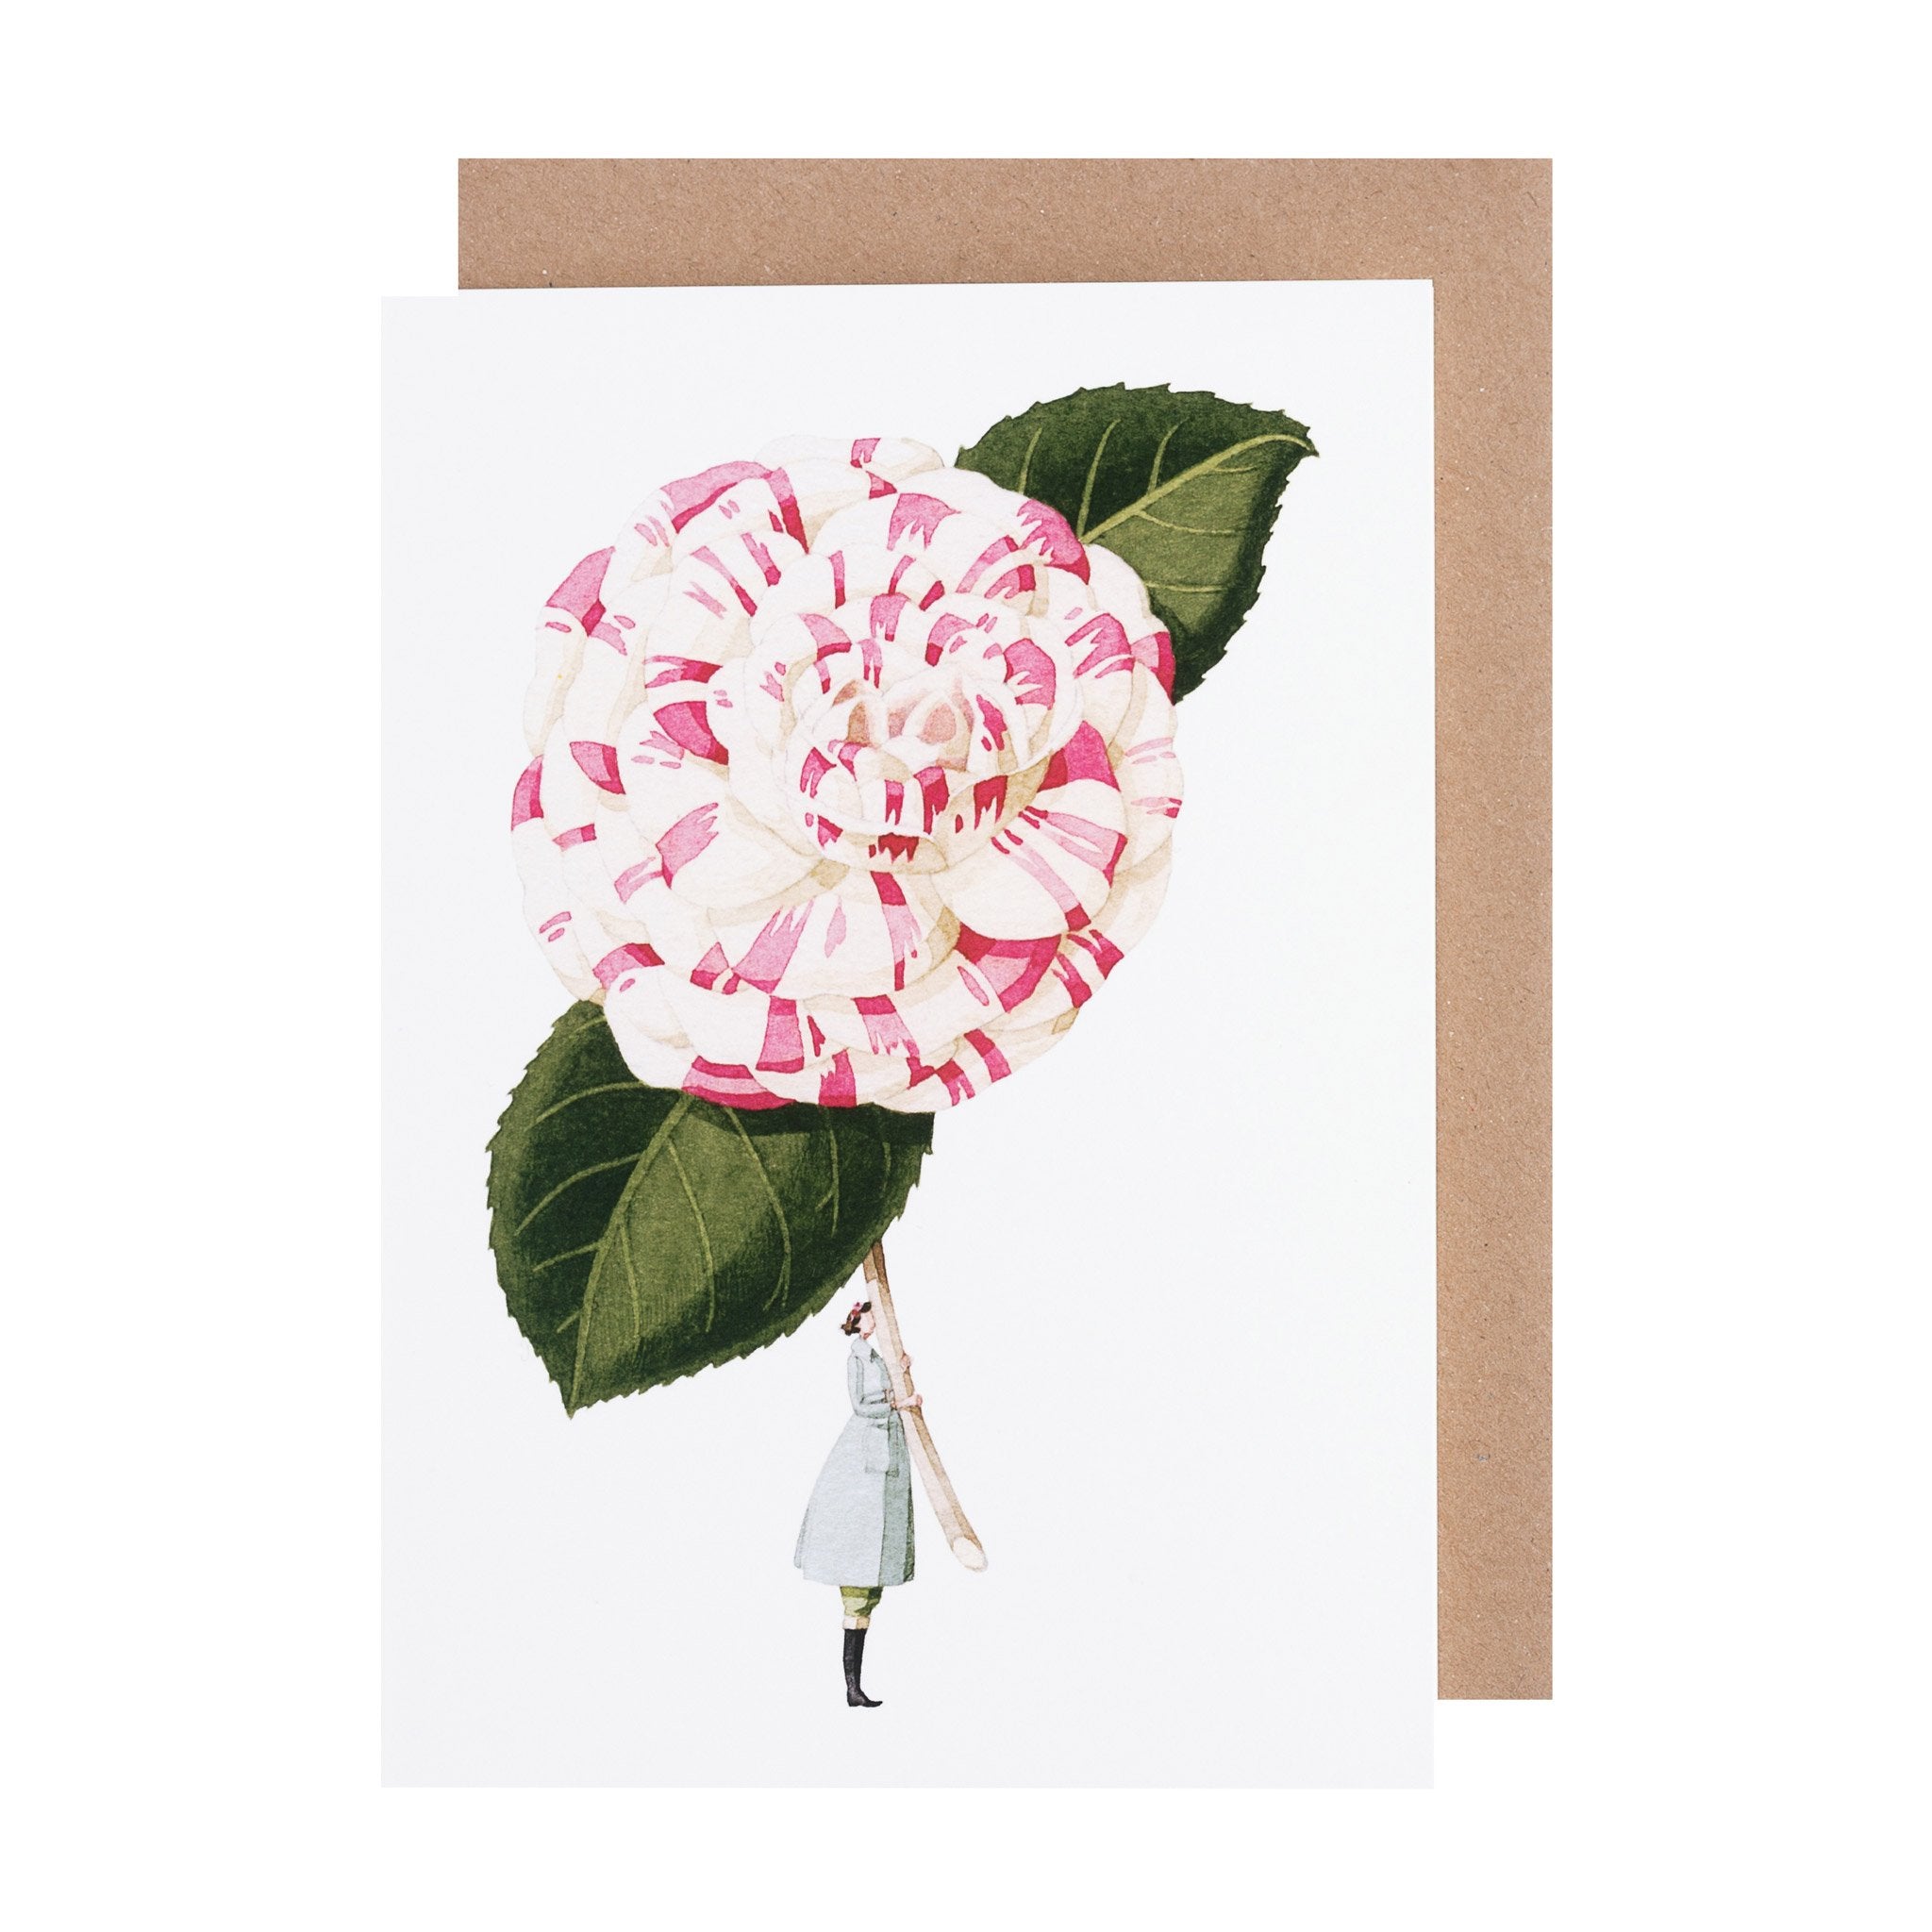 A whimsical illustration by Laura Stoddart of a tiny person holding a giant pink and white striped rose, printed on environmentally sustainable paper as a unique Camellia Greeting Card by Hester &amp; Cook.